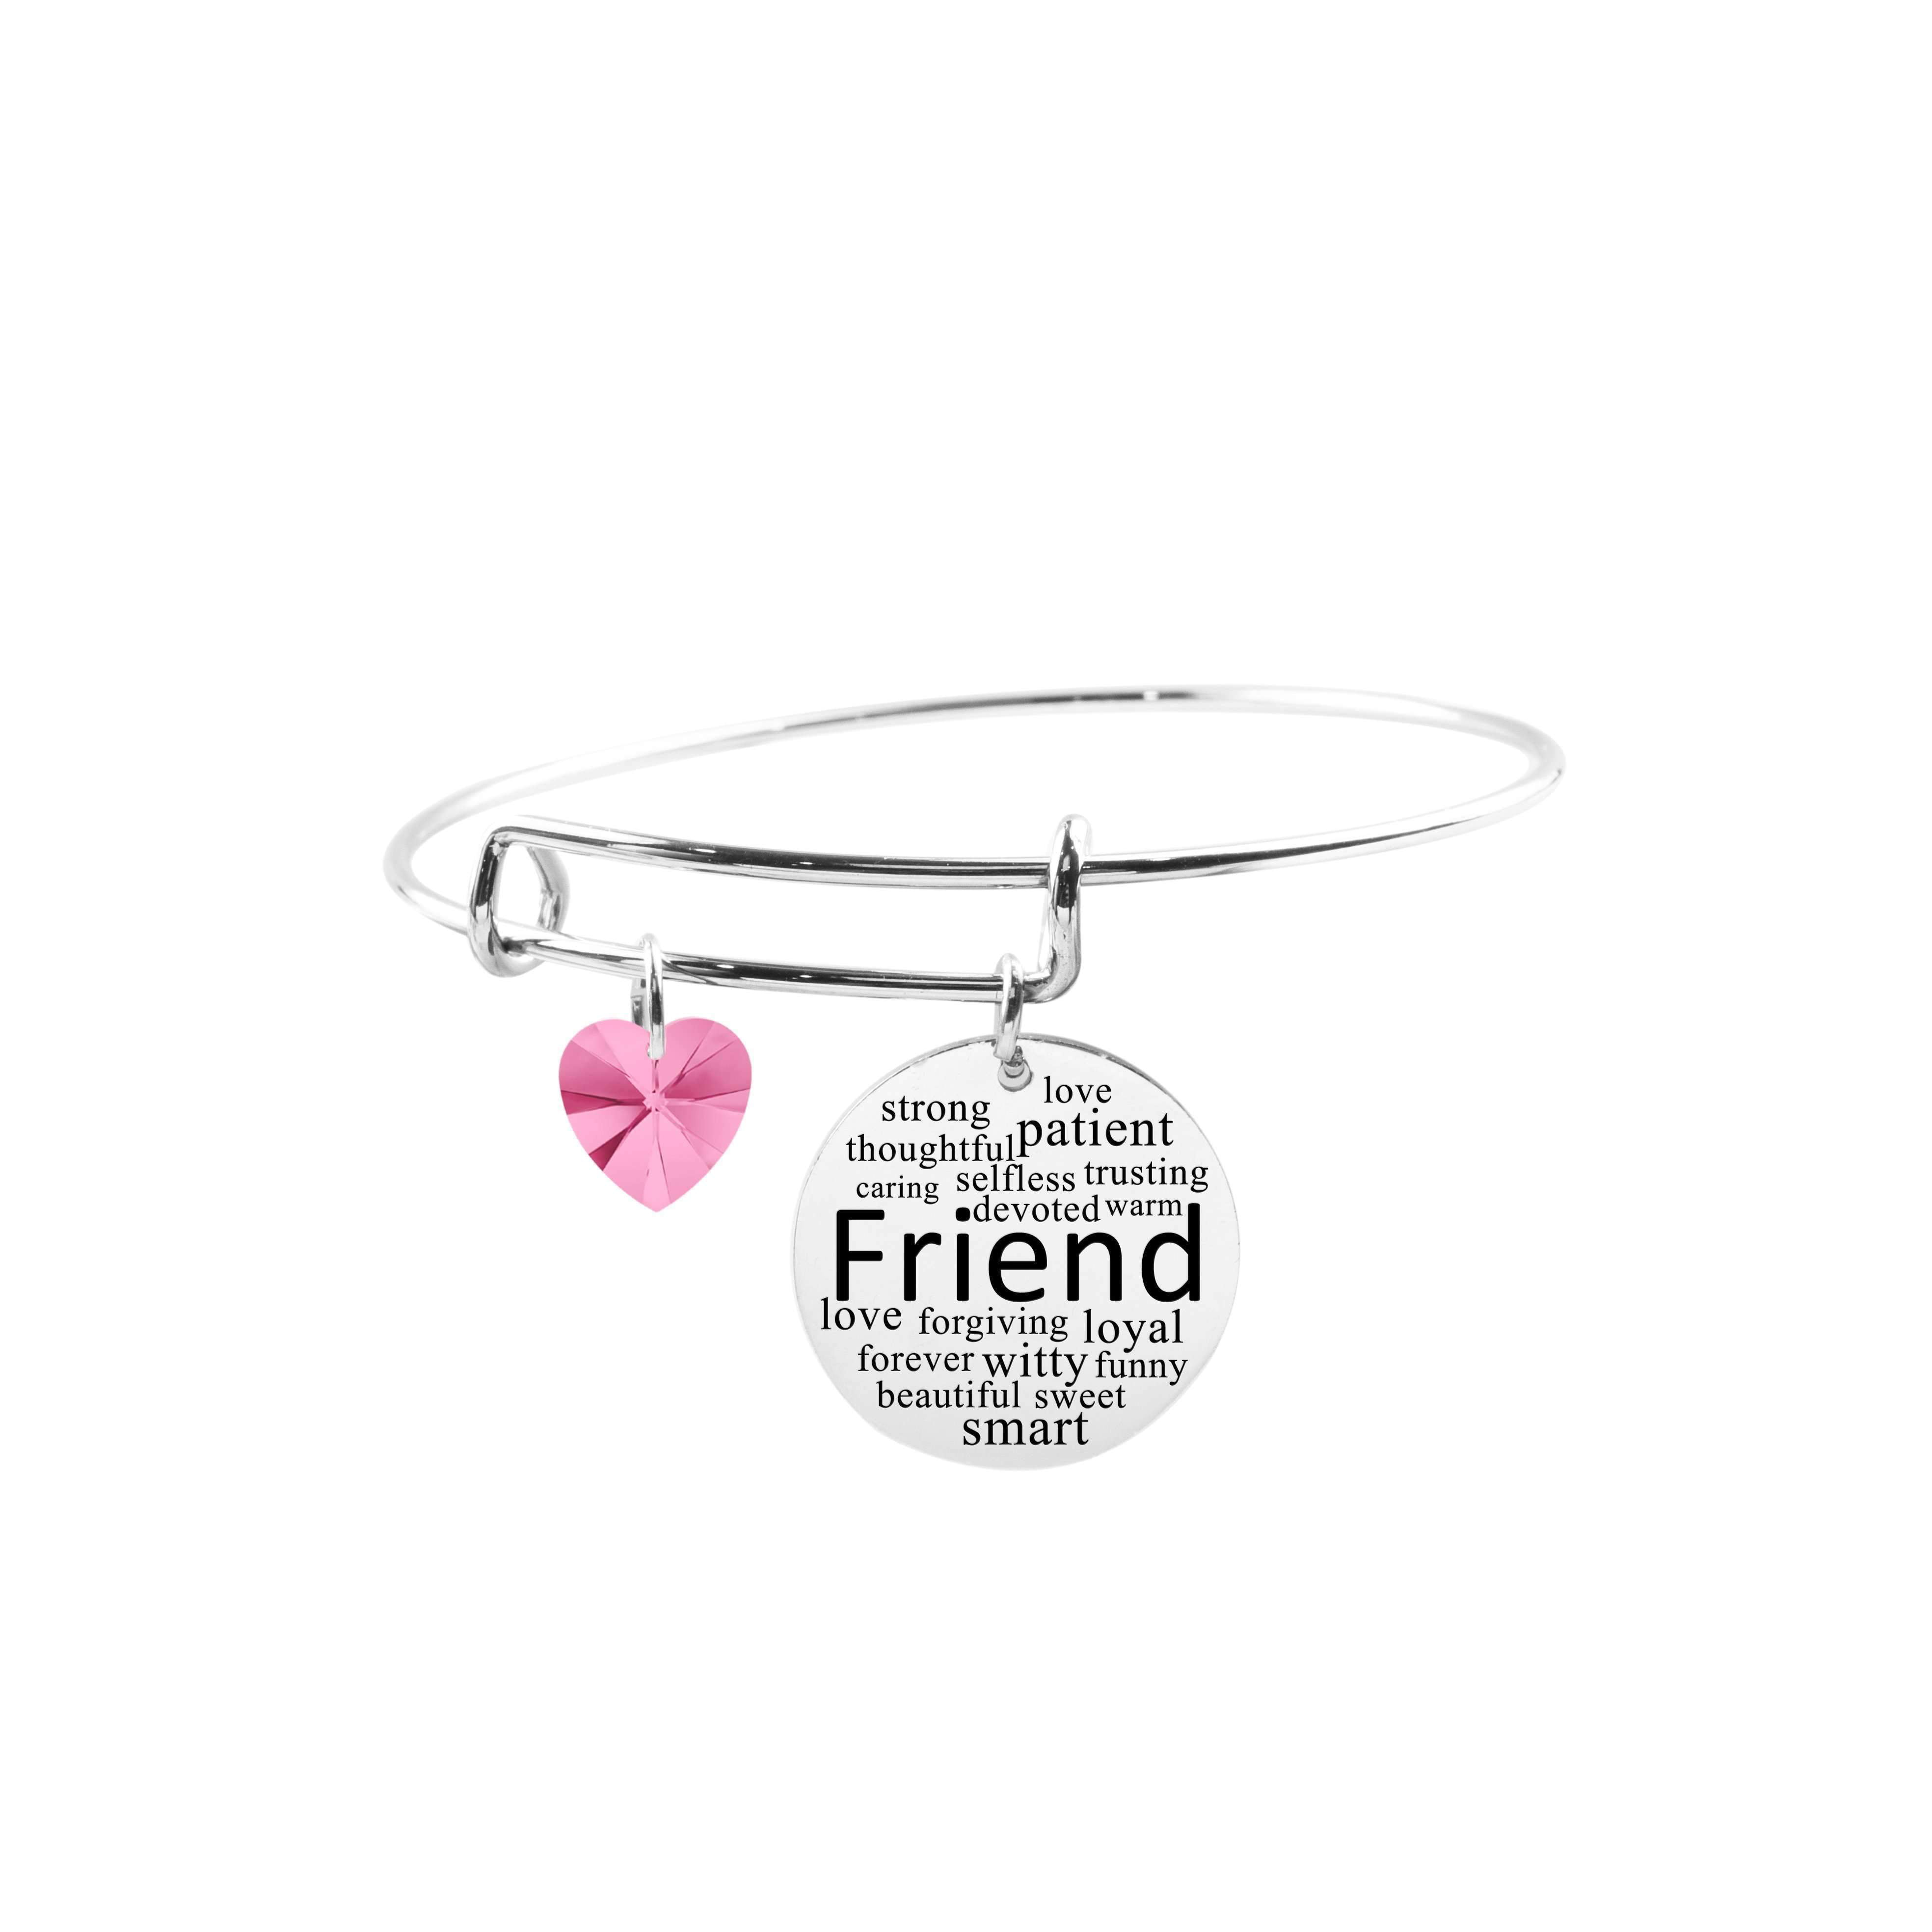 Greengrocer auxiliary To disable Adjustable Bangle with Crystals from Swarovski - Friend - Walmart.com